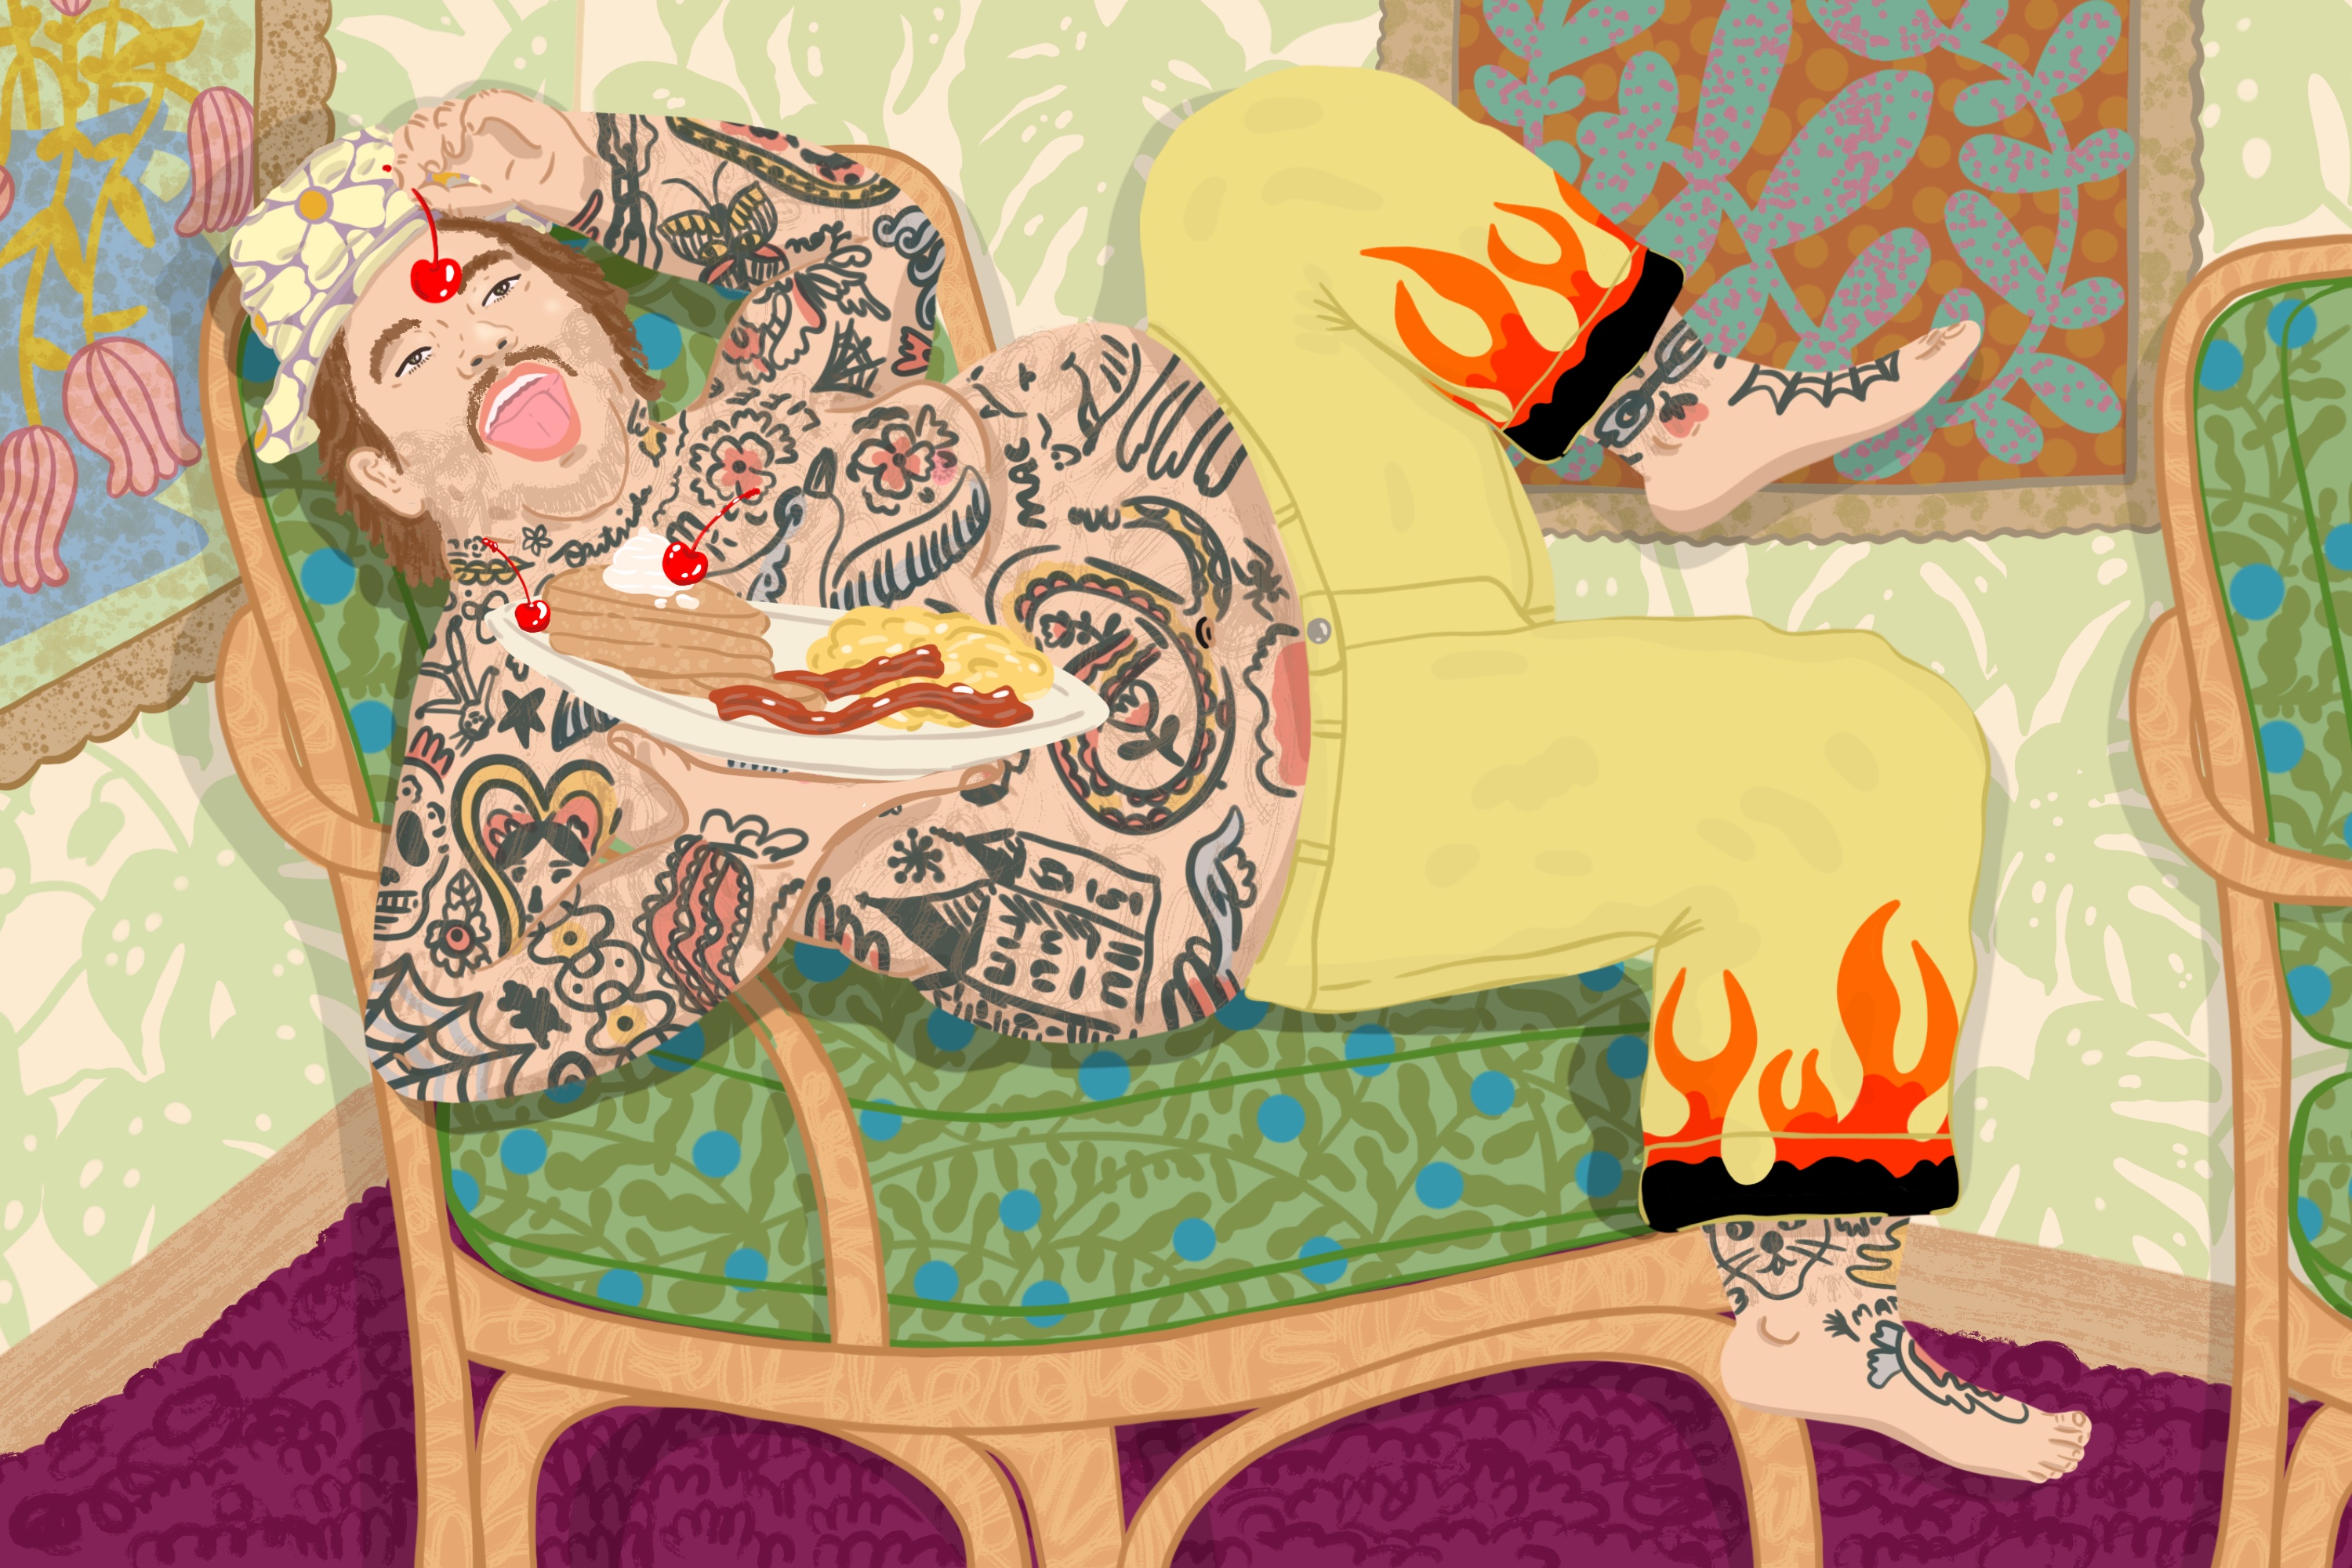 An illustration of Matty Matheson, shirtless and reclining on a chair, dangling a cherry above his open mouth.